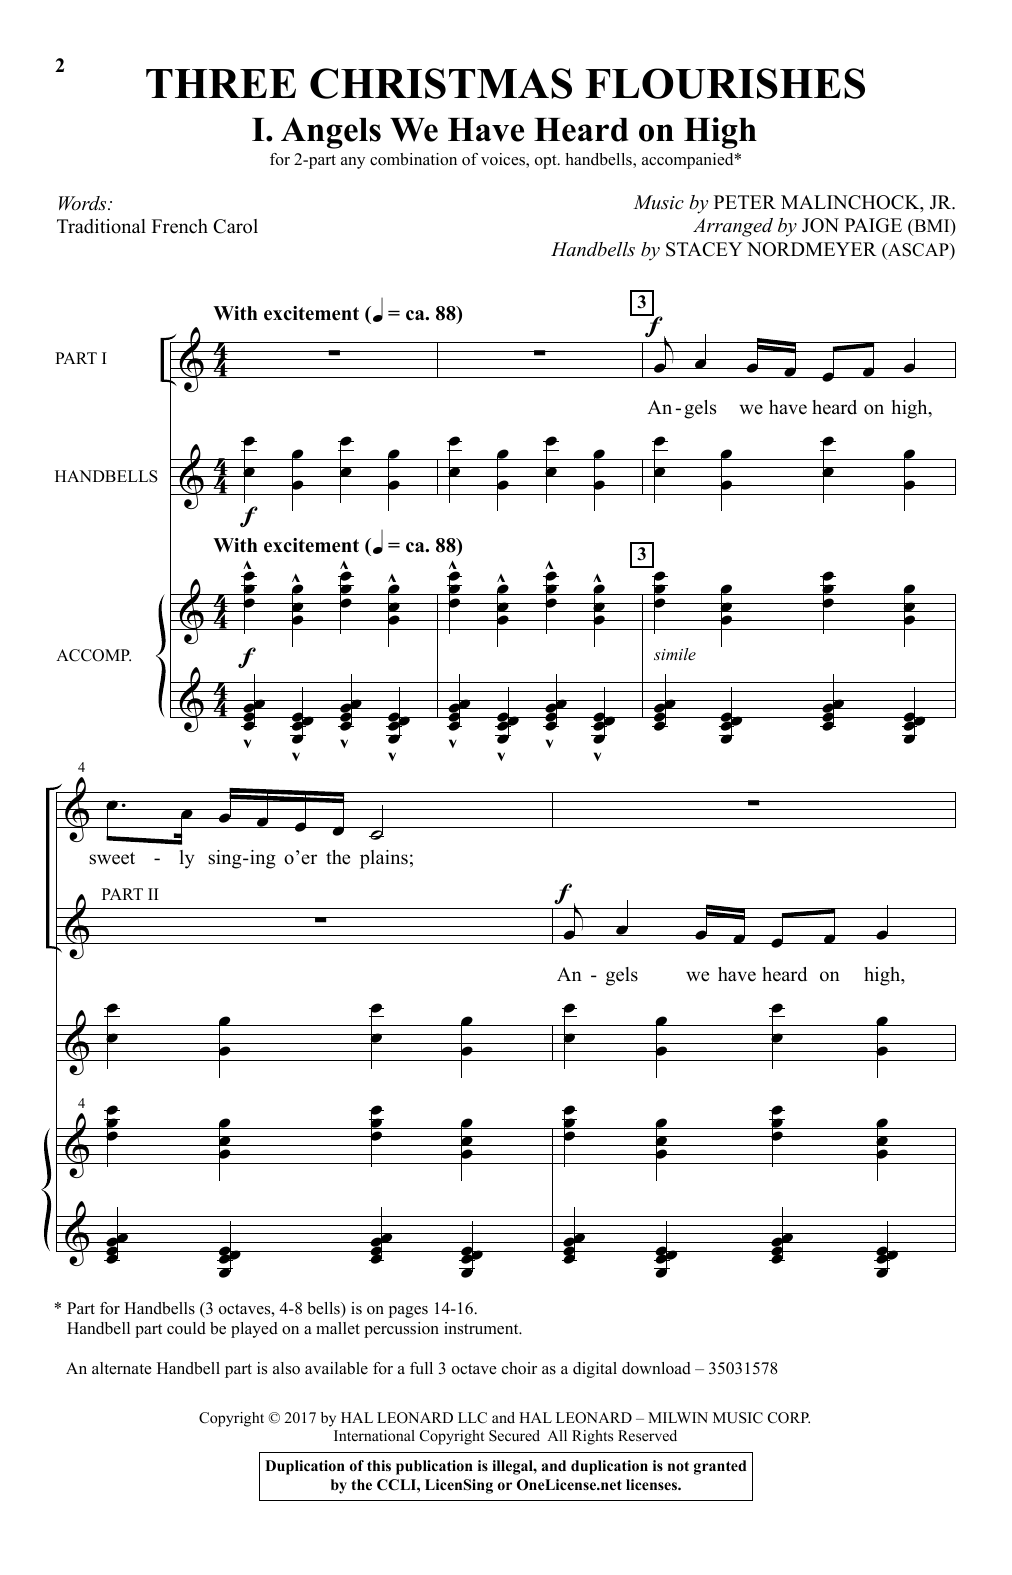 Download Jon Paige Angels We Have Heard On High Sheet Music